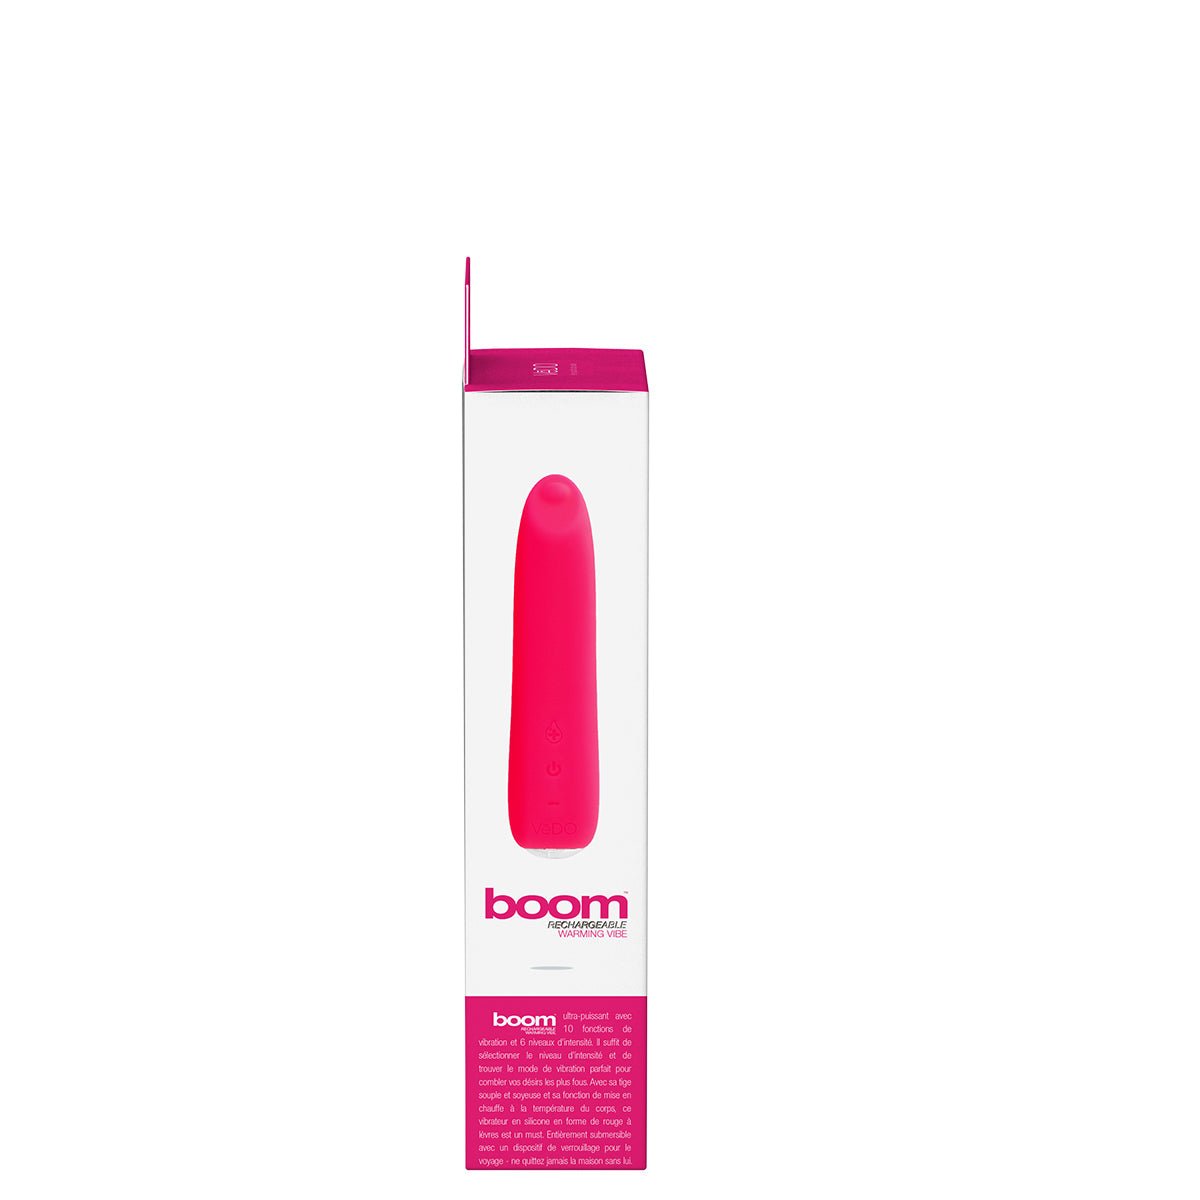 Boom Rechargeable Warming Vibe - VeDO G-Spot Vibrator